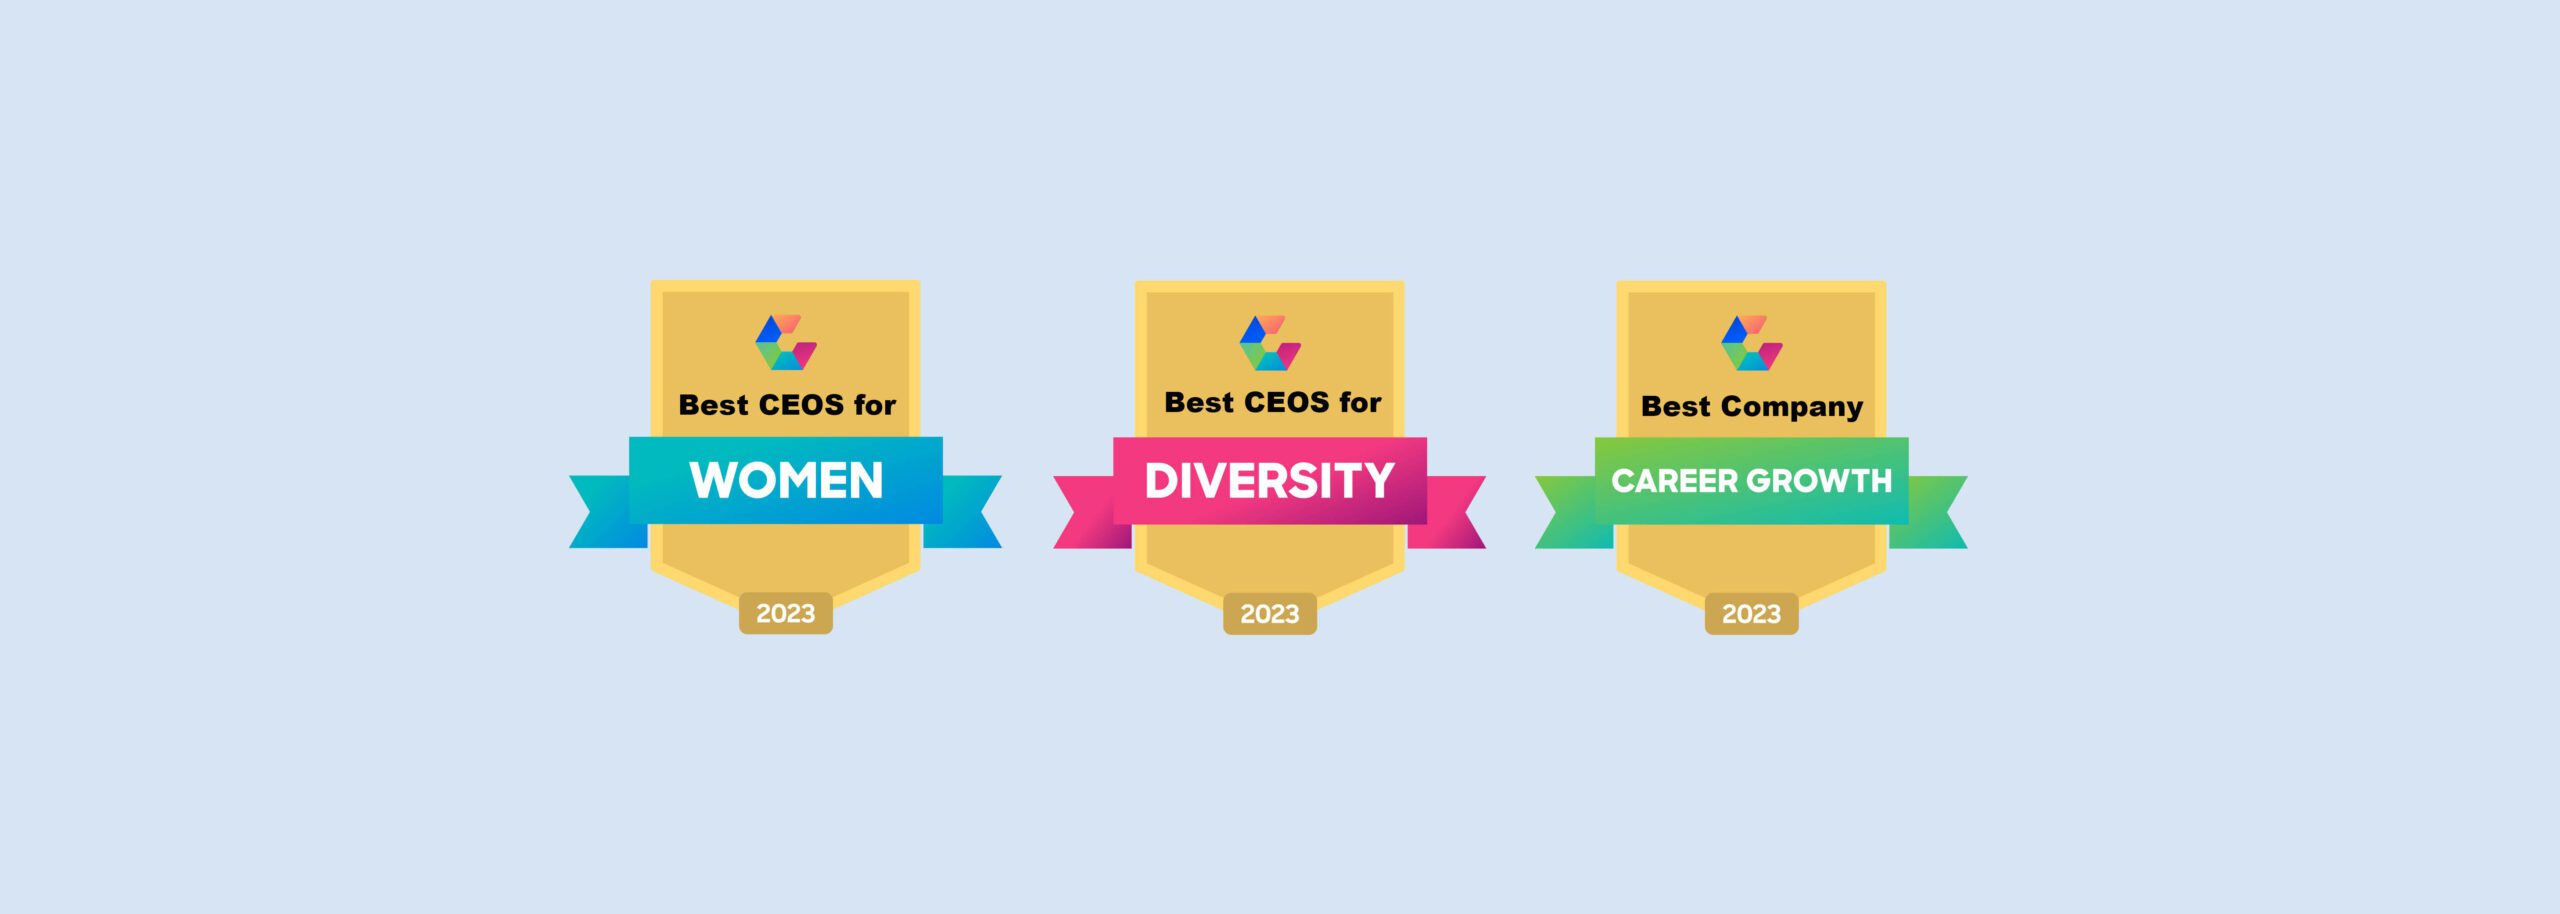 Comparably banner - Best CEO diversity , women empowerment and career growth